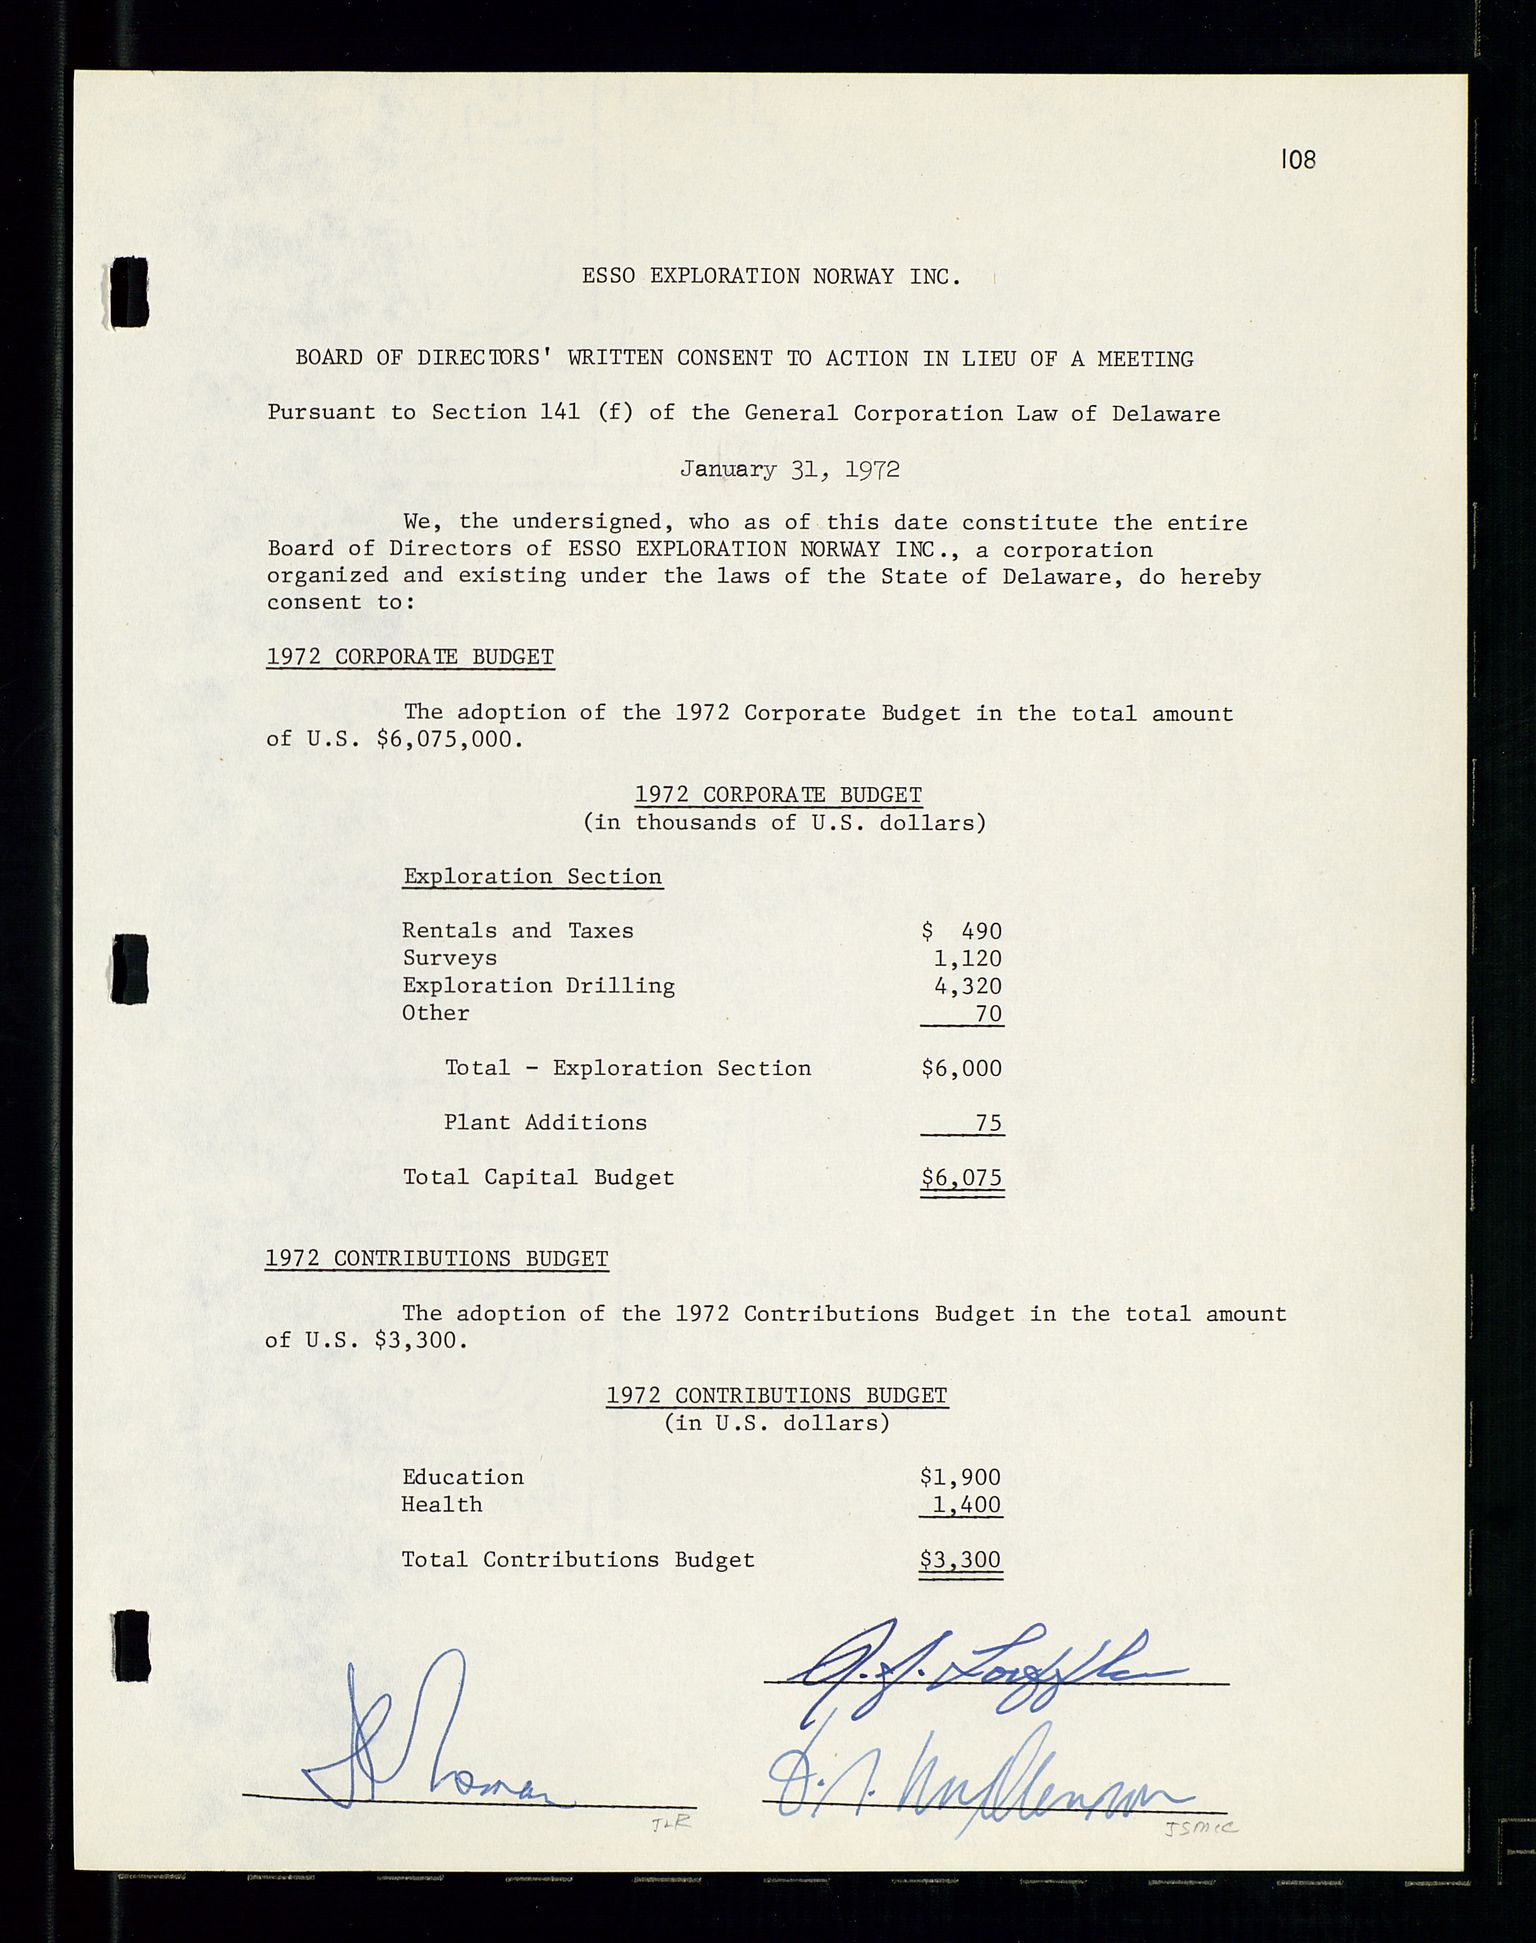 Pa 1512 - Esso Exploration and Production Norway Inc., SAST/A-101917/A/Aa/L0001/0001: Styredokumenter / Corporate records, By-Laws, Board meeting minutes, Incorporations, 1965-1975, p. 108